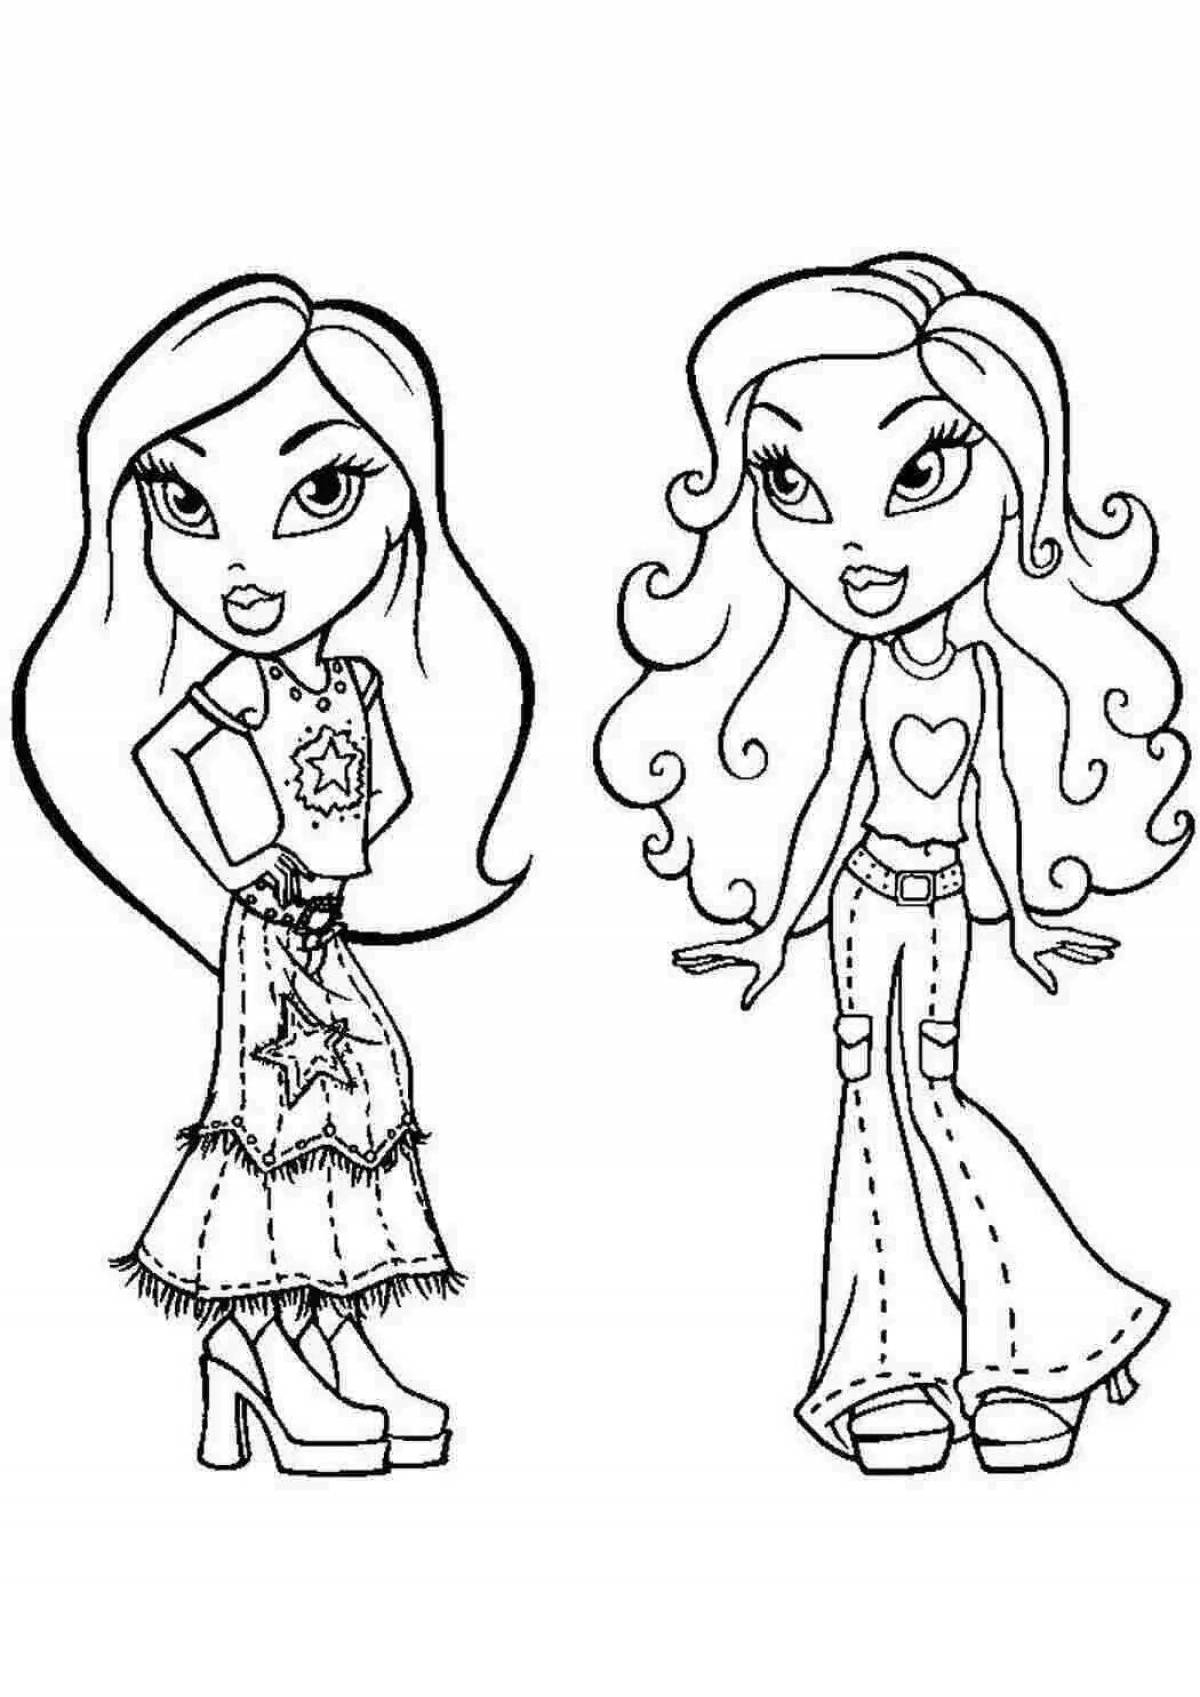 Brilliant coloring page 2 for girls